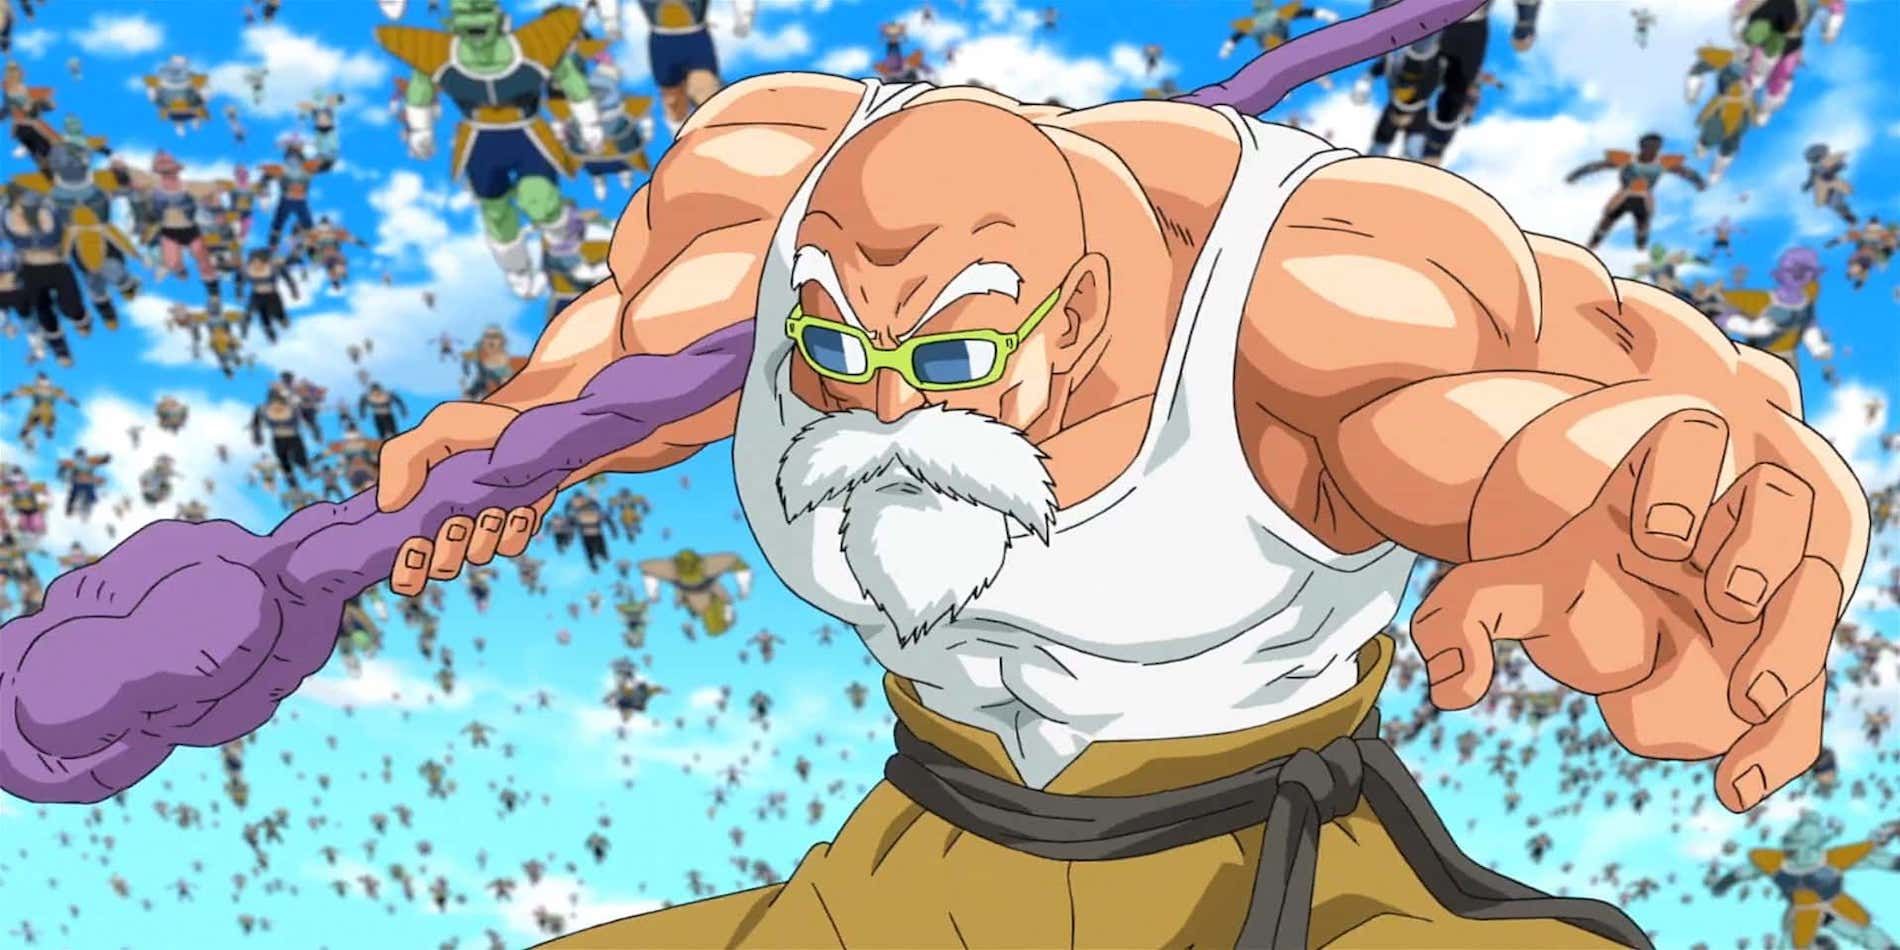 plot explanation - Why is Master Roshi in the tournament of power? - Movies  & TV Stack Exchange